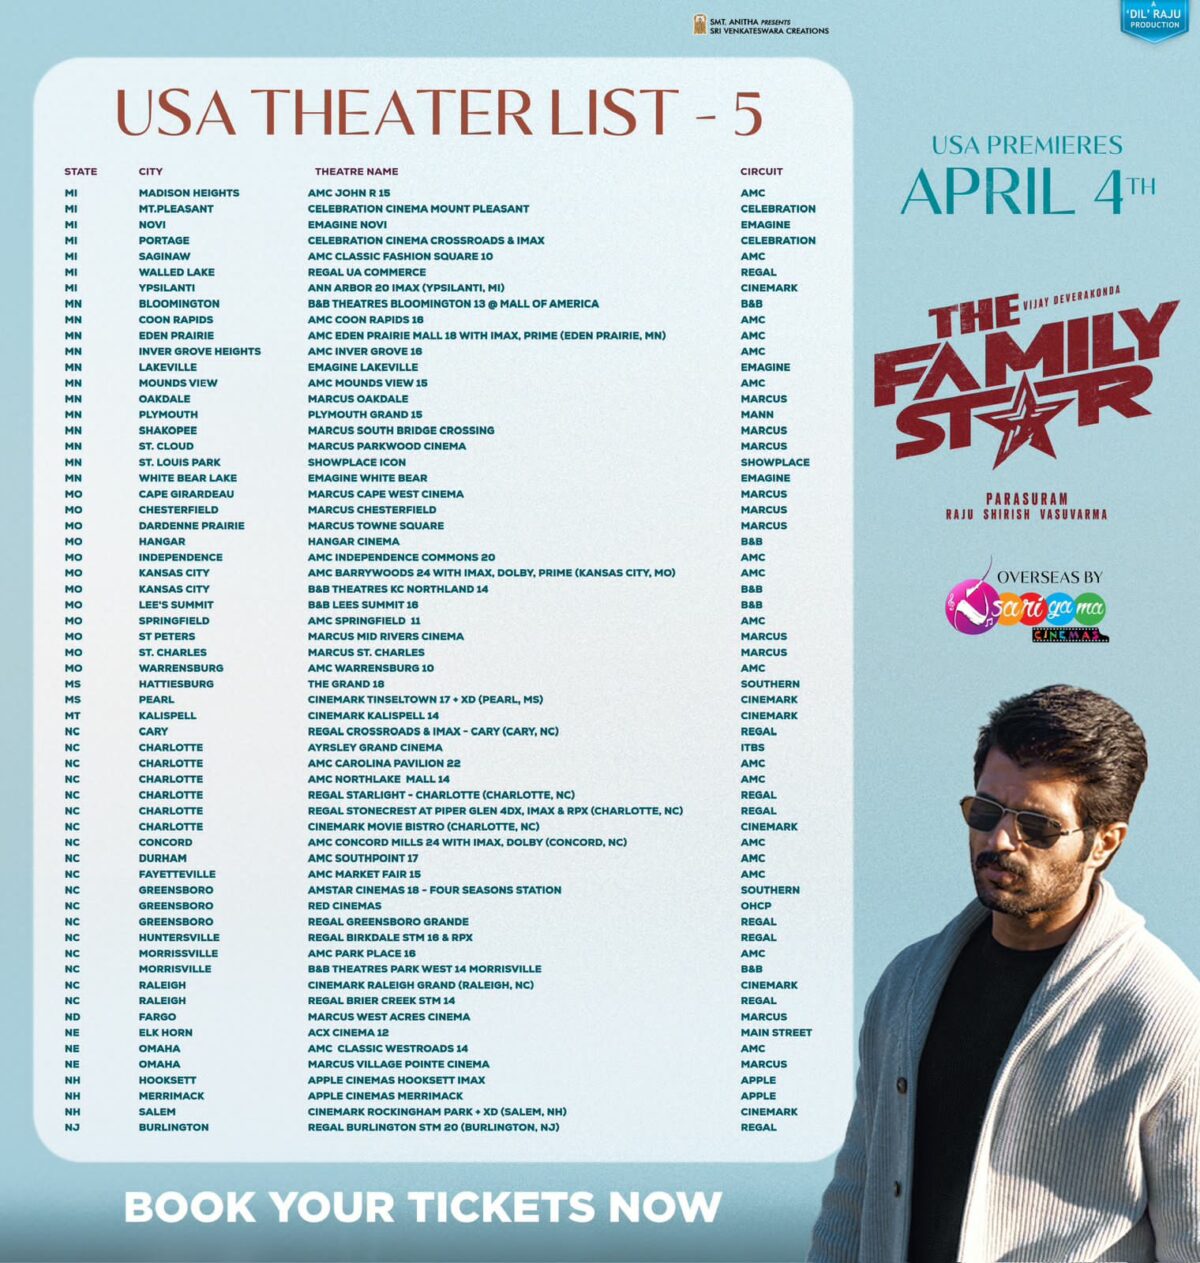 The Family Star Usa Premieres On April 4th, Theatres List Out